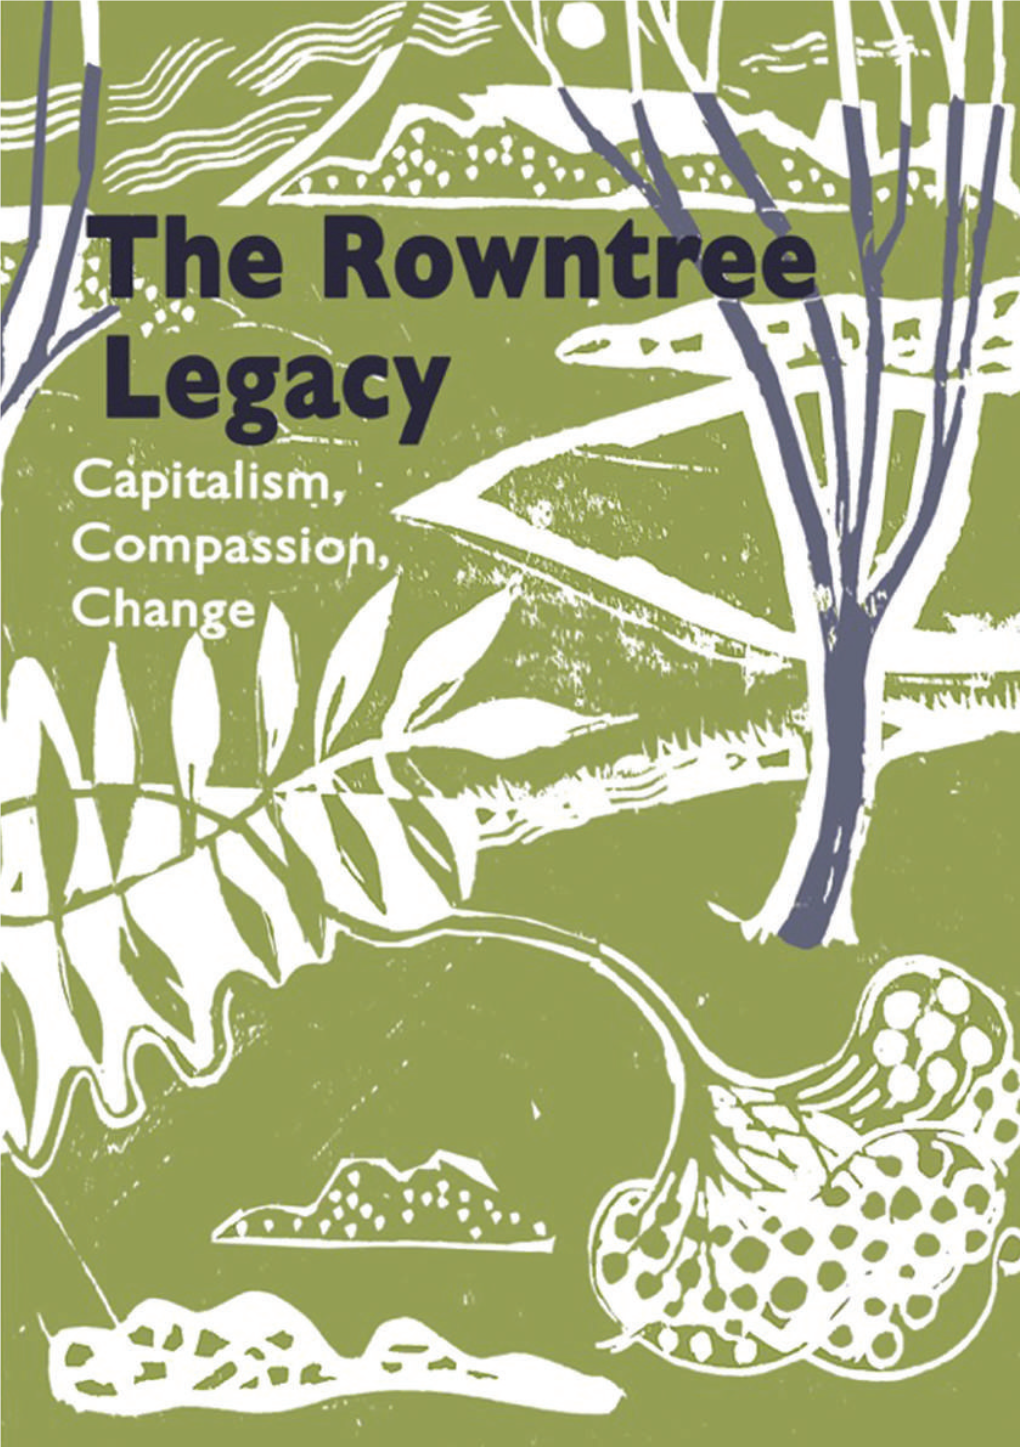 The Rowntree Legacy